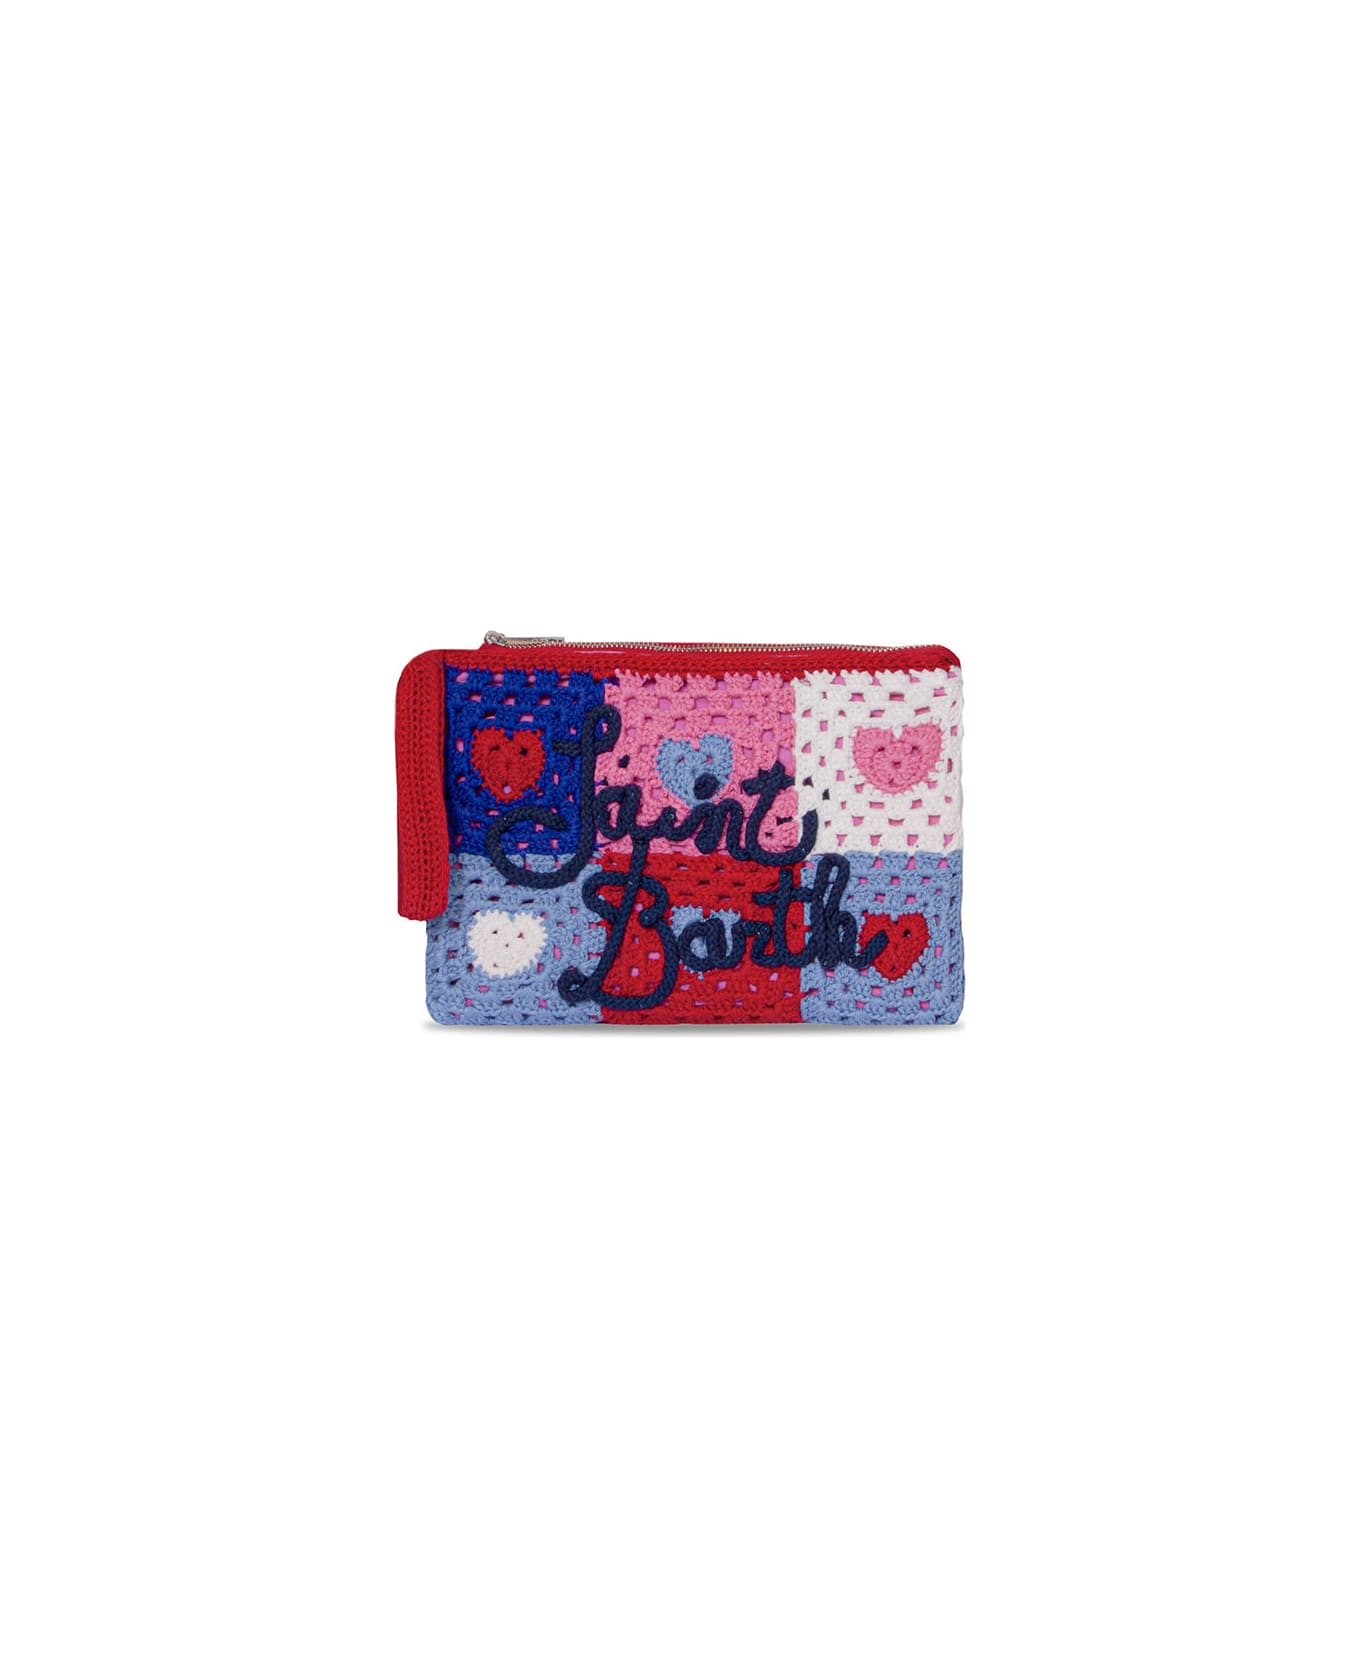 MC2 Saint Barth Parisienne Crochet Pochette With Heart Embroidery - RED